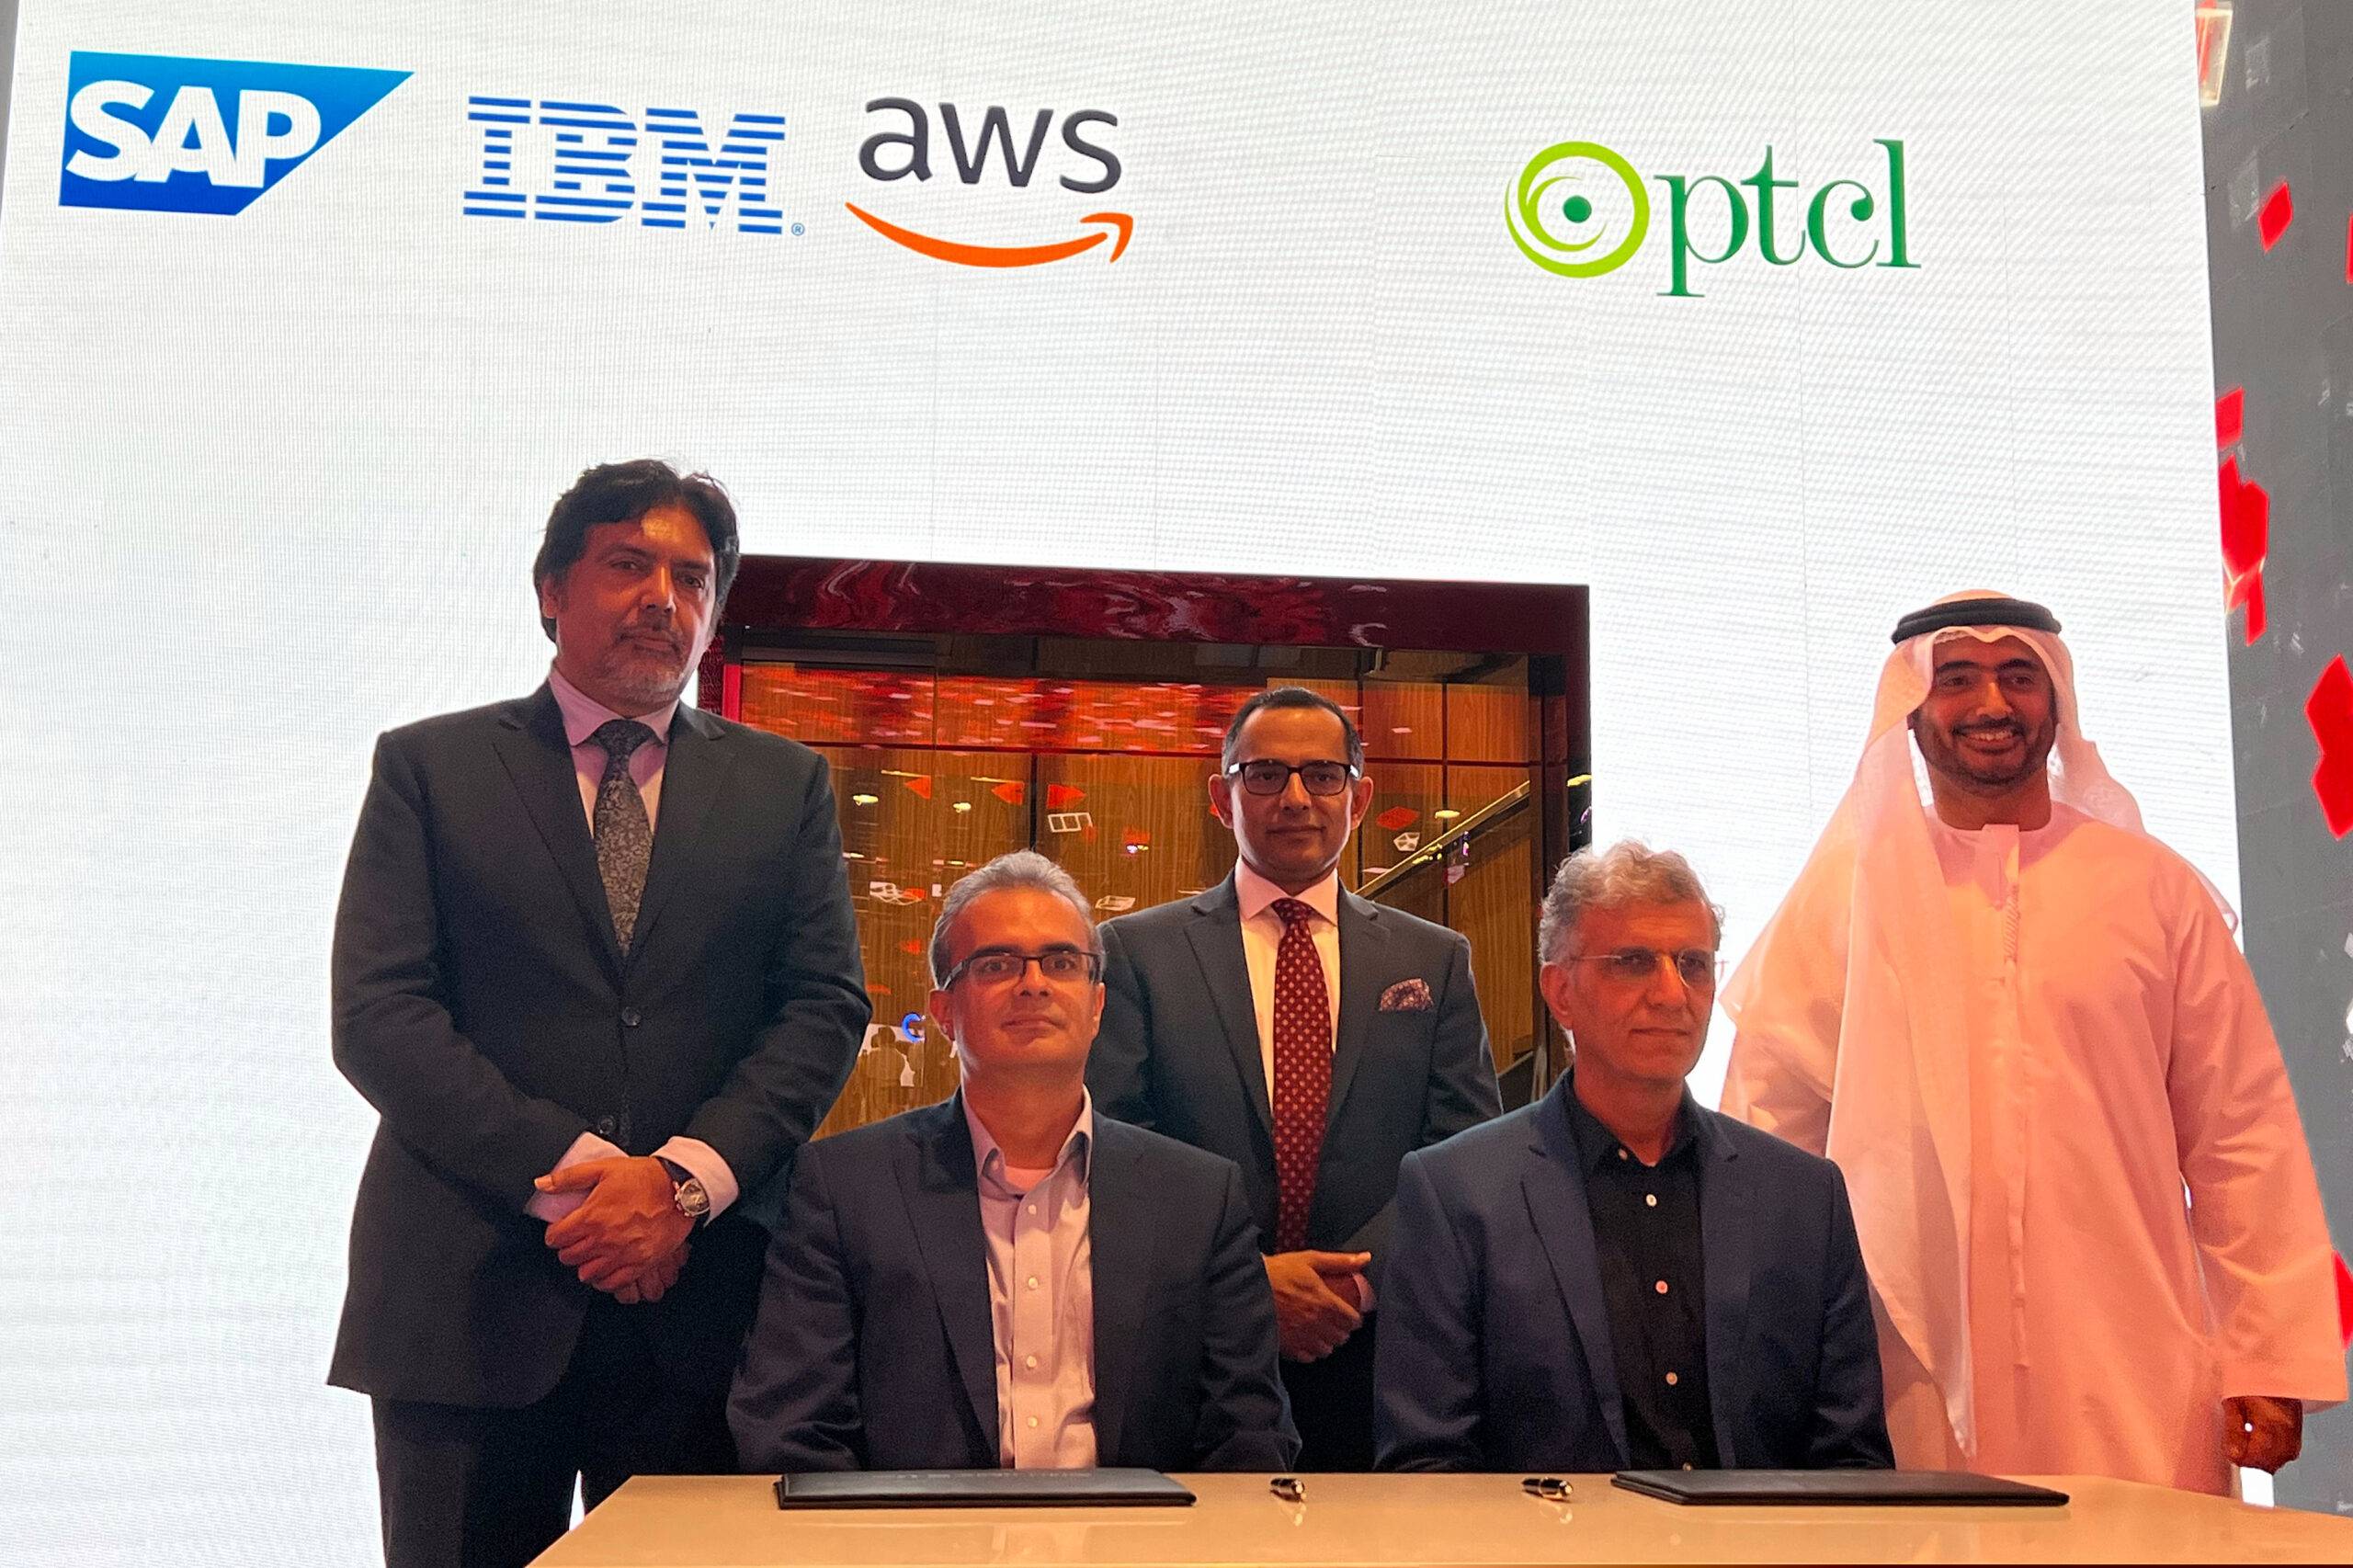 PTCL Group engages IBM for Business Transformation through RISE with SAP on Amazon Web Services